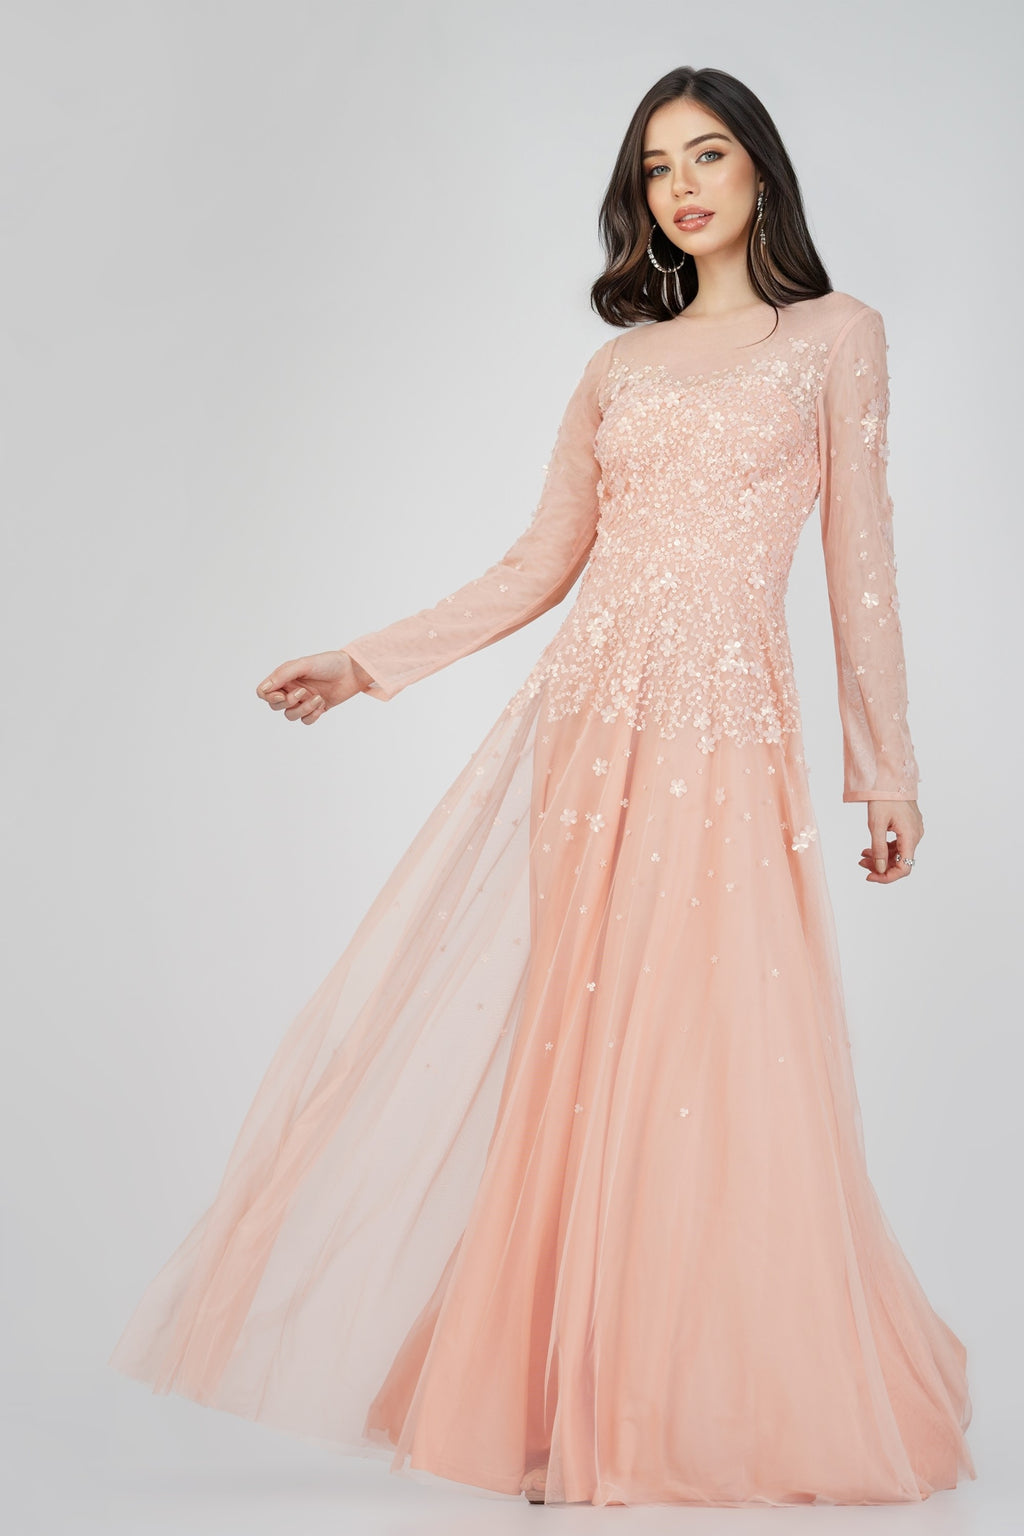 Luciene Long Sleeve Embellished Maxi Dress in Blush Pink – Lace